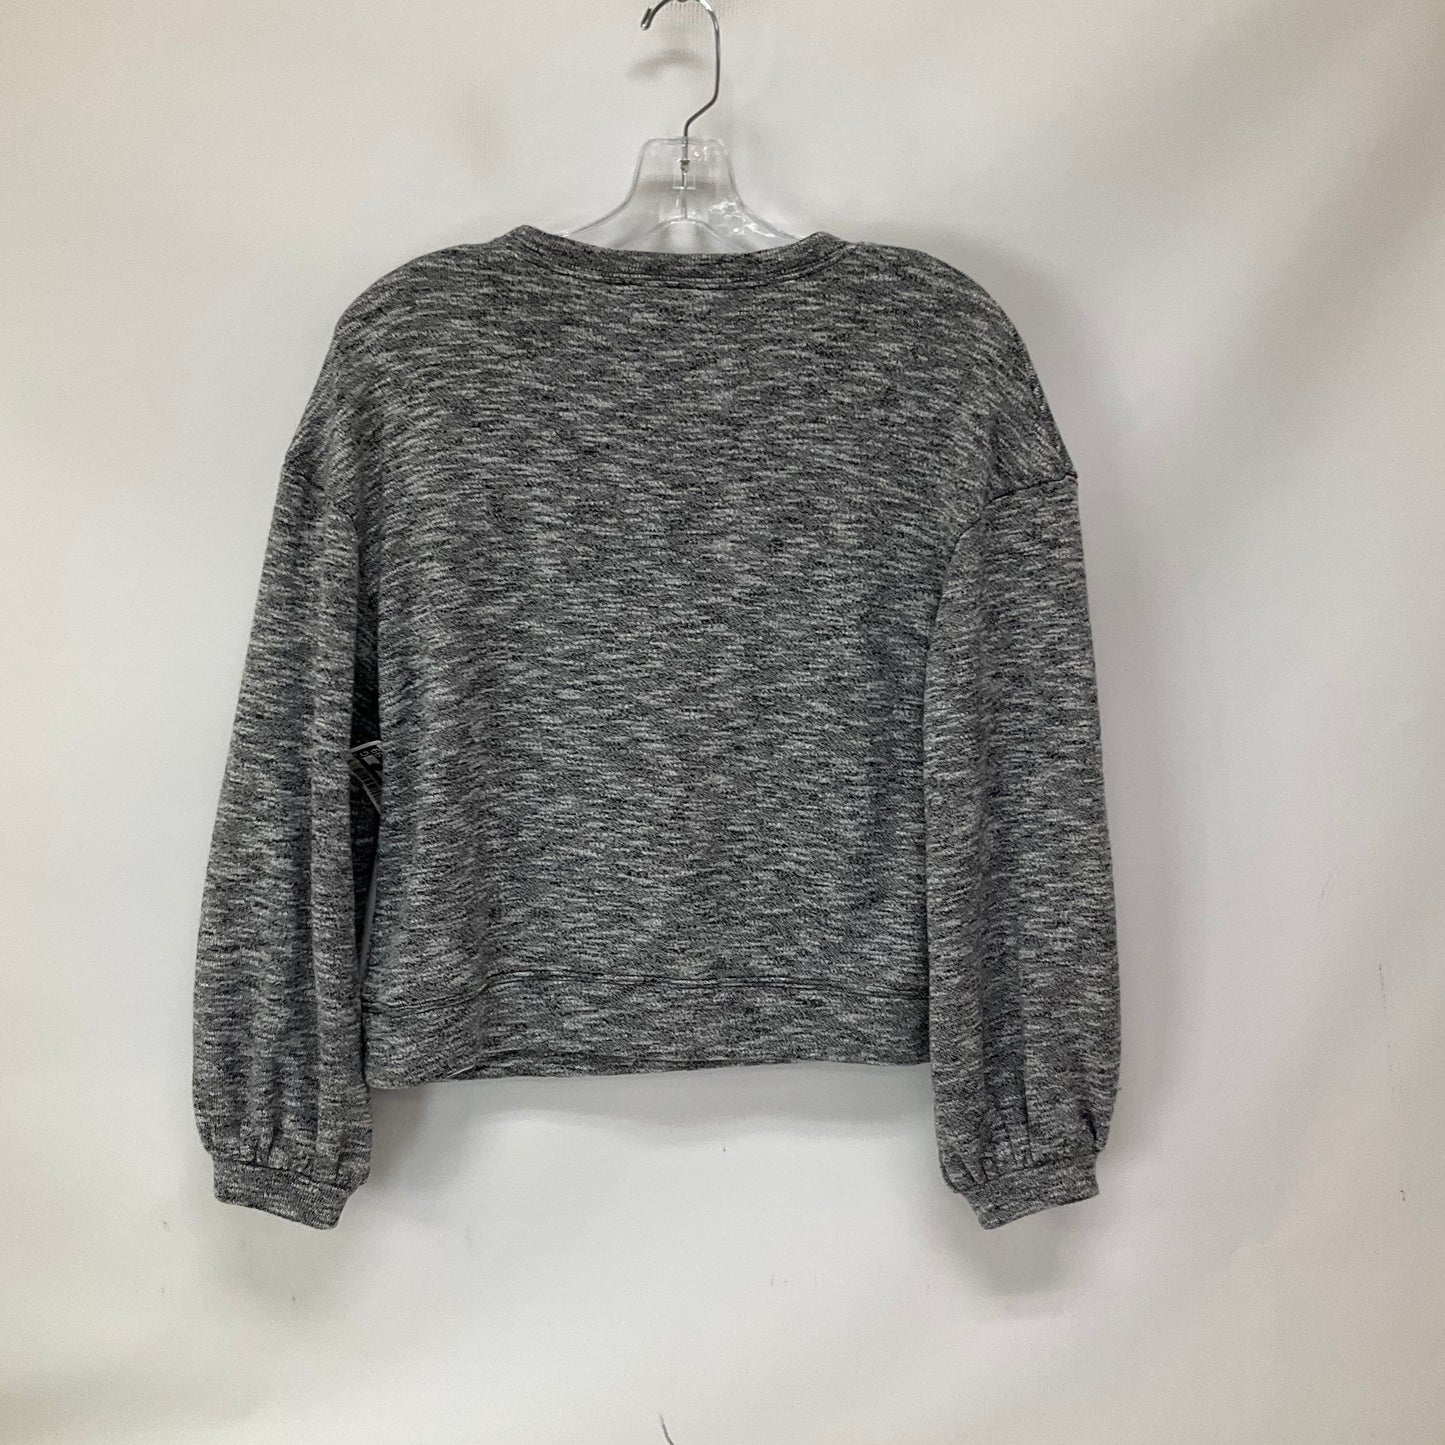 Black & White Top Long Sleeve Madewell, Size S